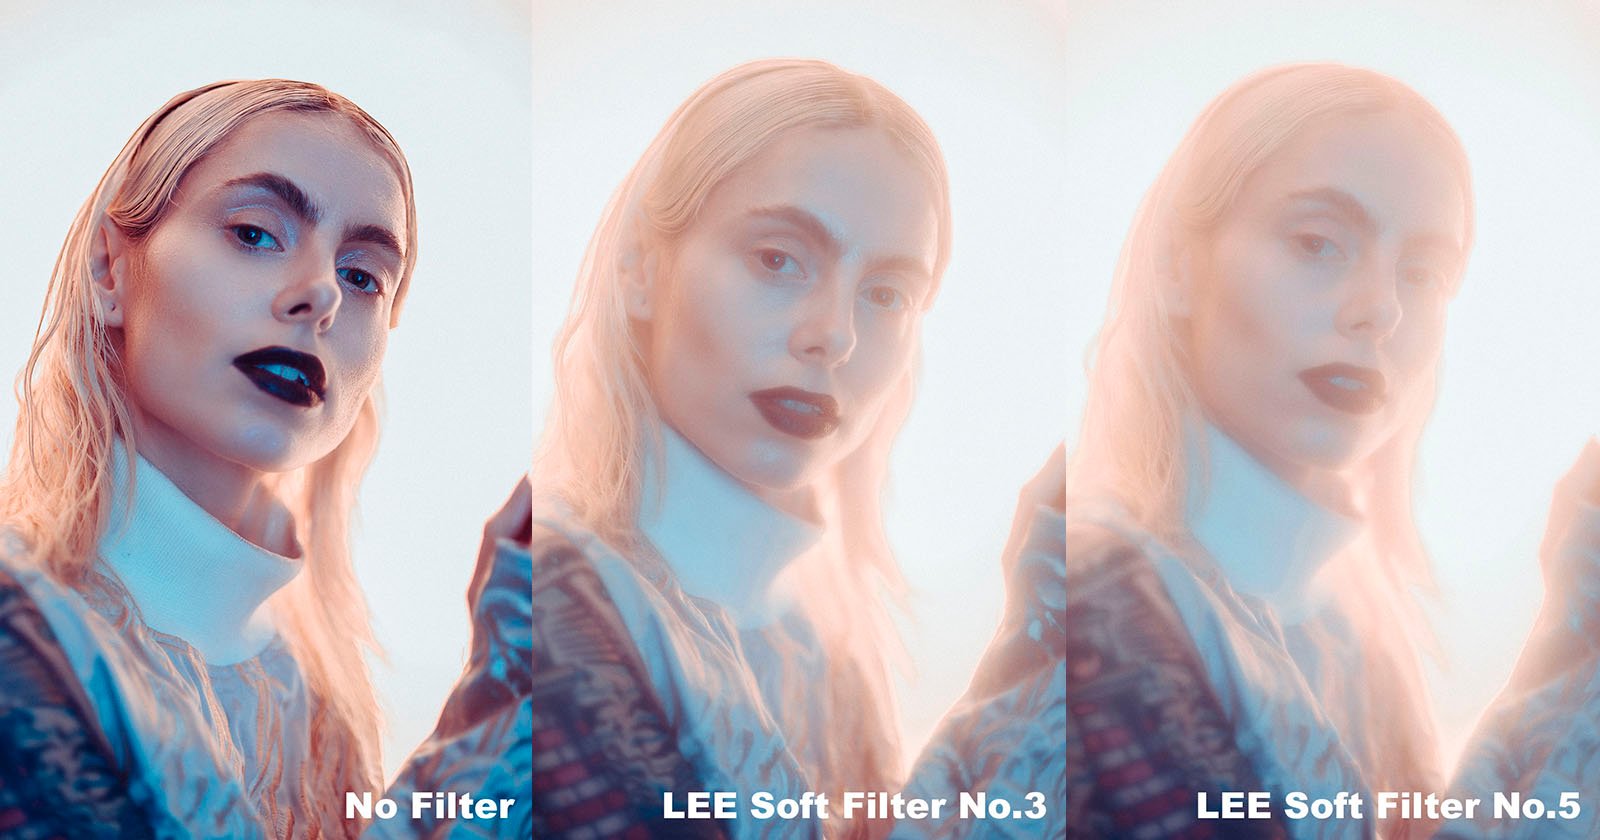 Anekdote zeevruchten Kennis maken Using Diffusion Filters: A Comparison of LEE Soft Filters 1 to 5 | PetaPixel